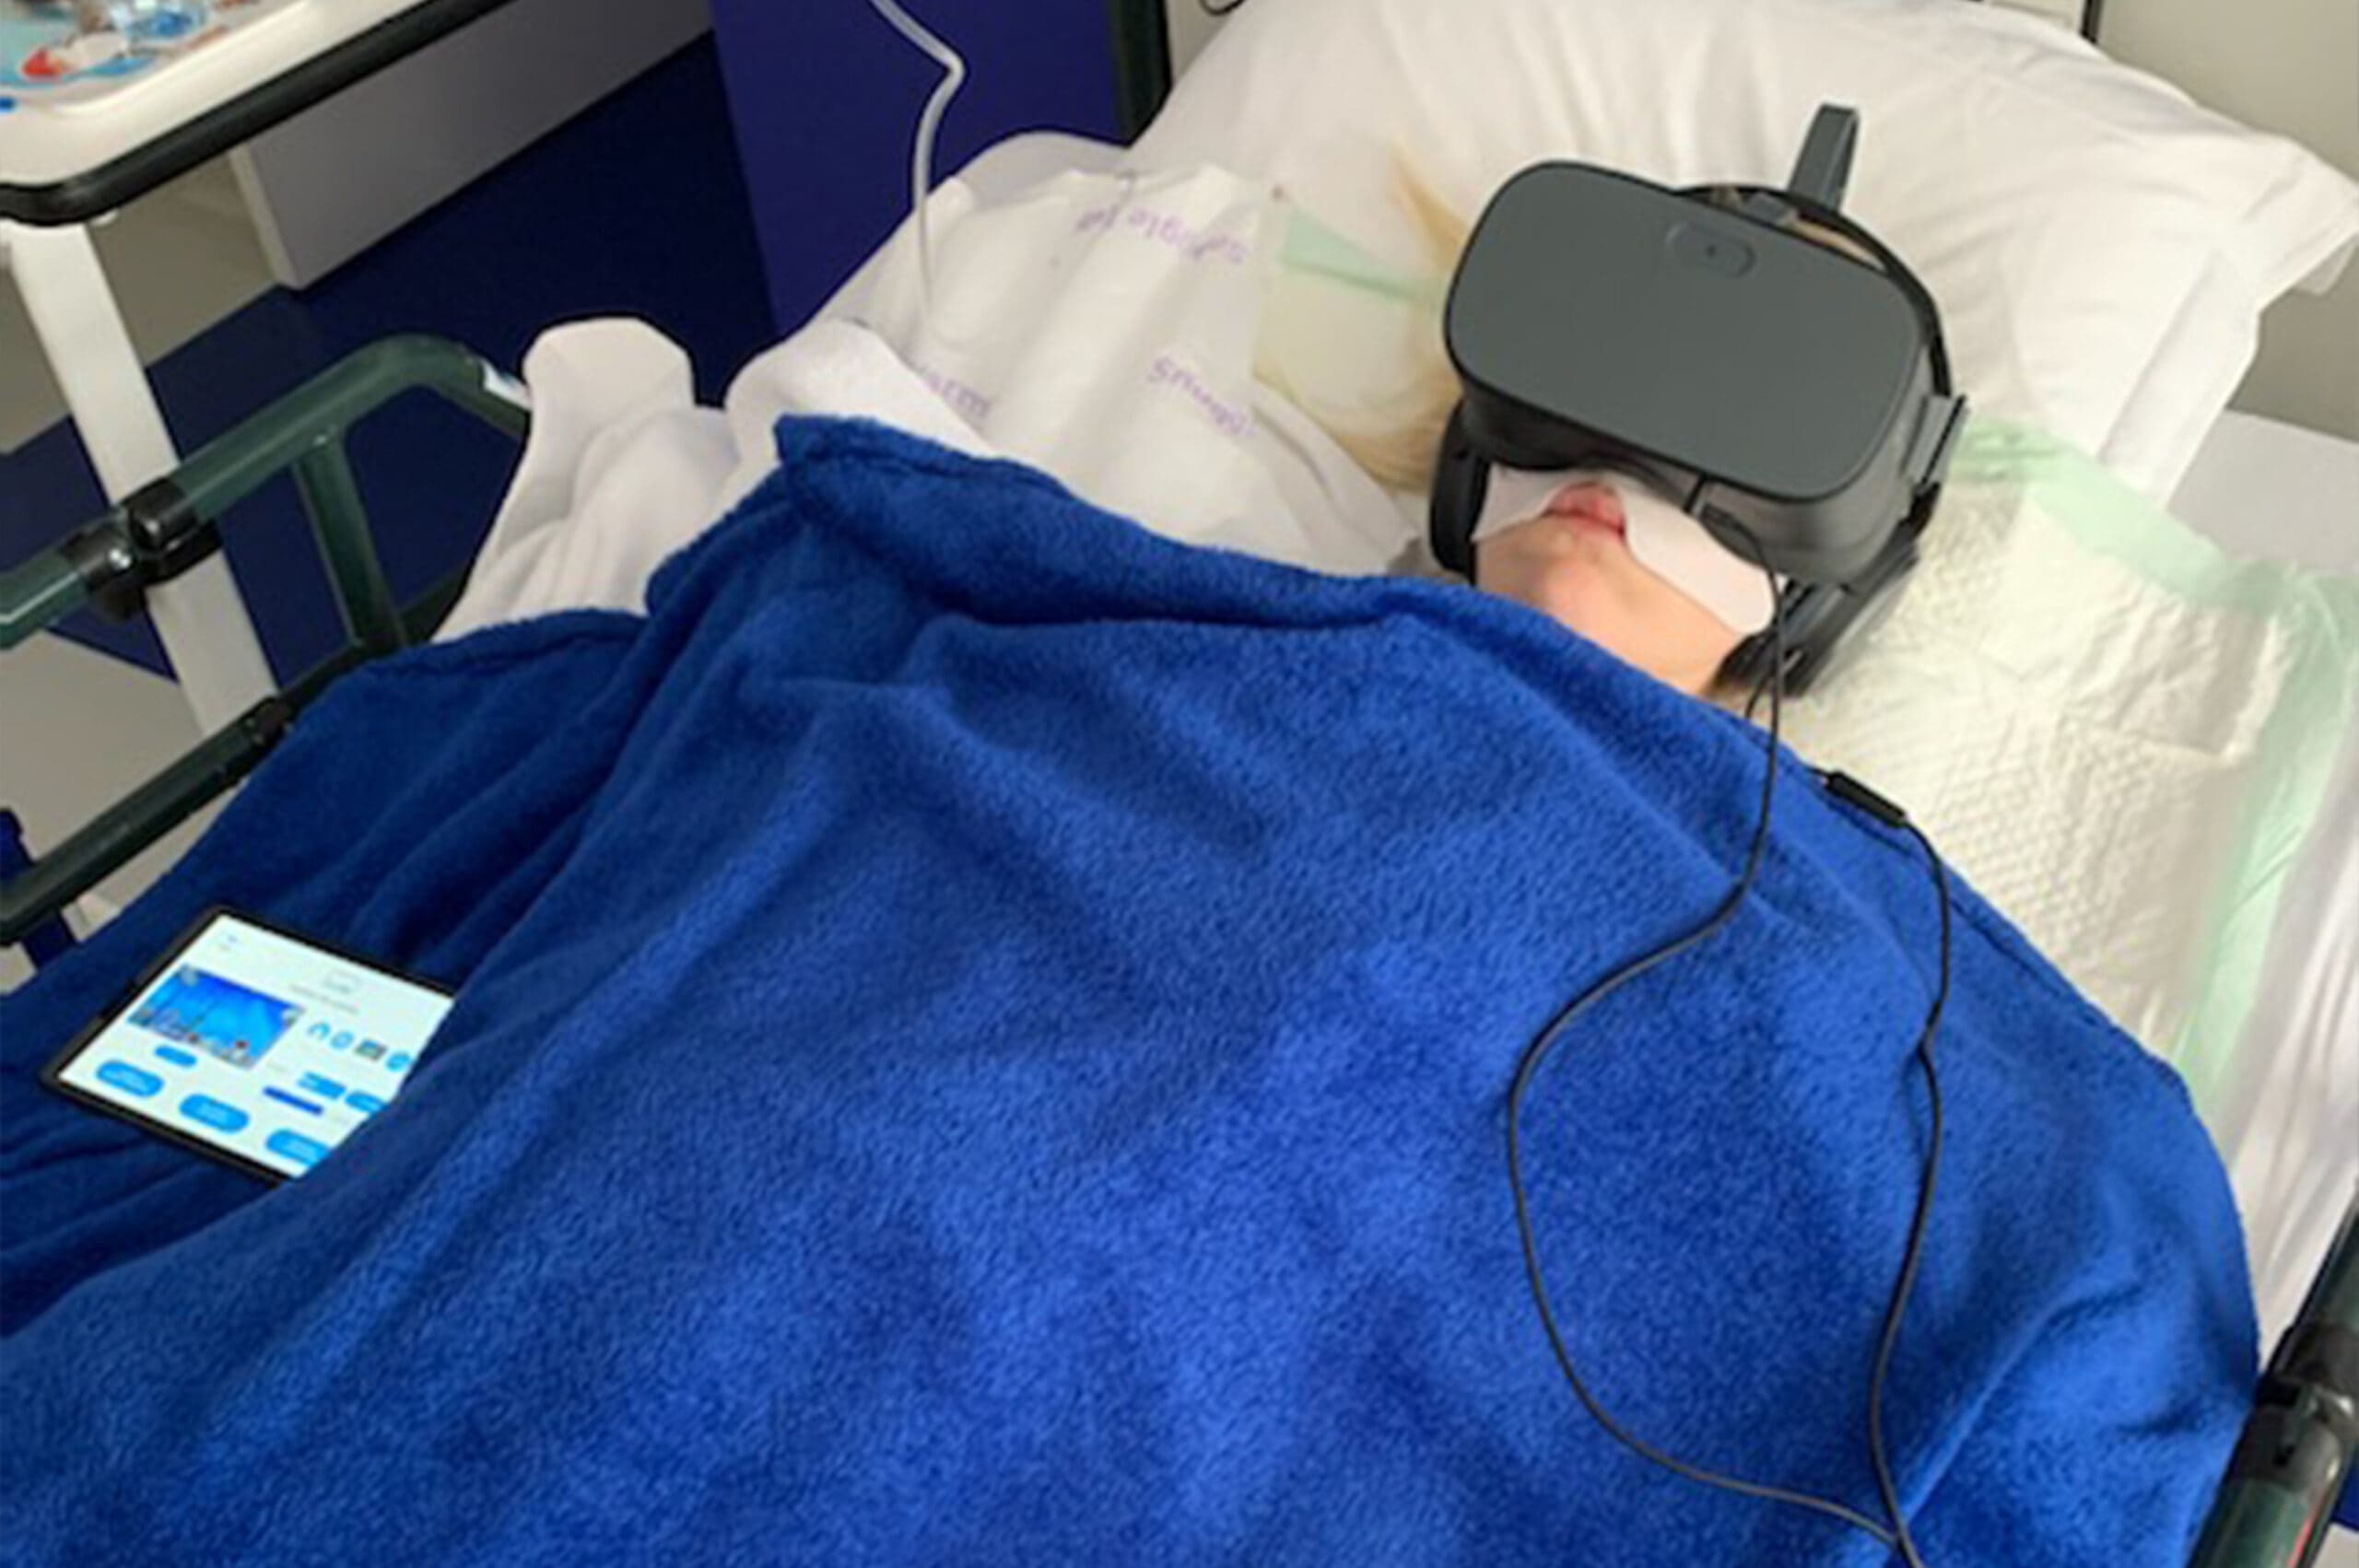 Virtual reality is a therapeutic alternative to pharmacological treatments for relieving stress and pain in cosmetic surgery patients.